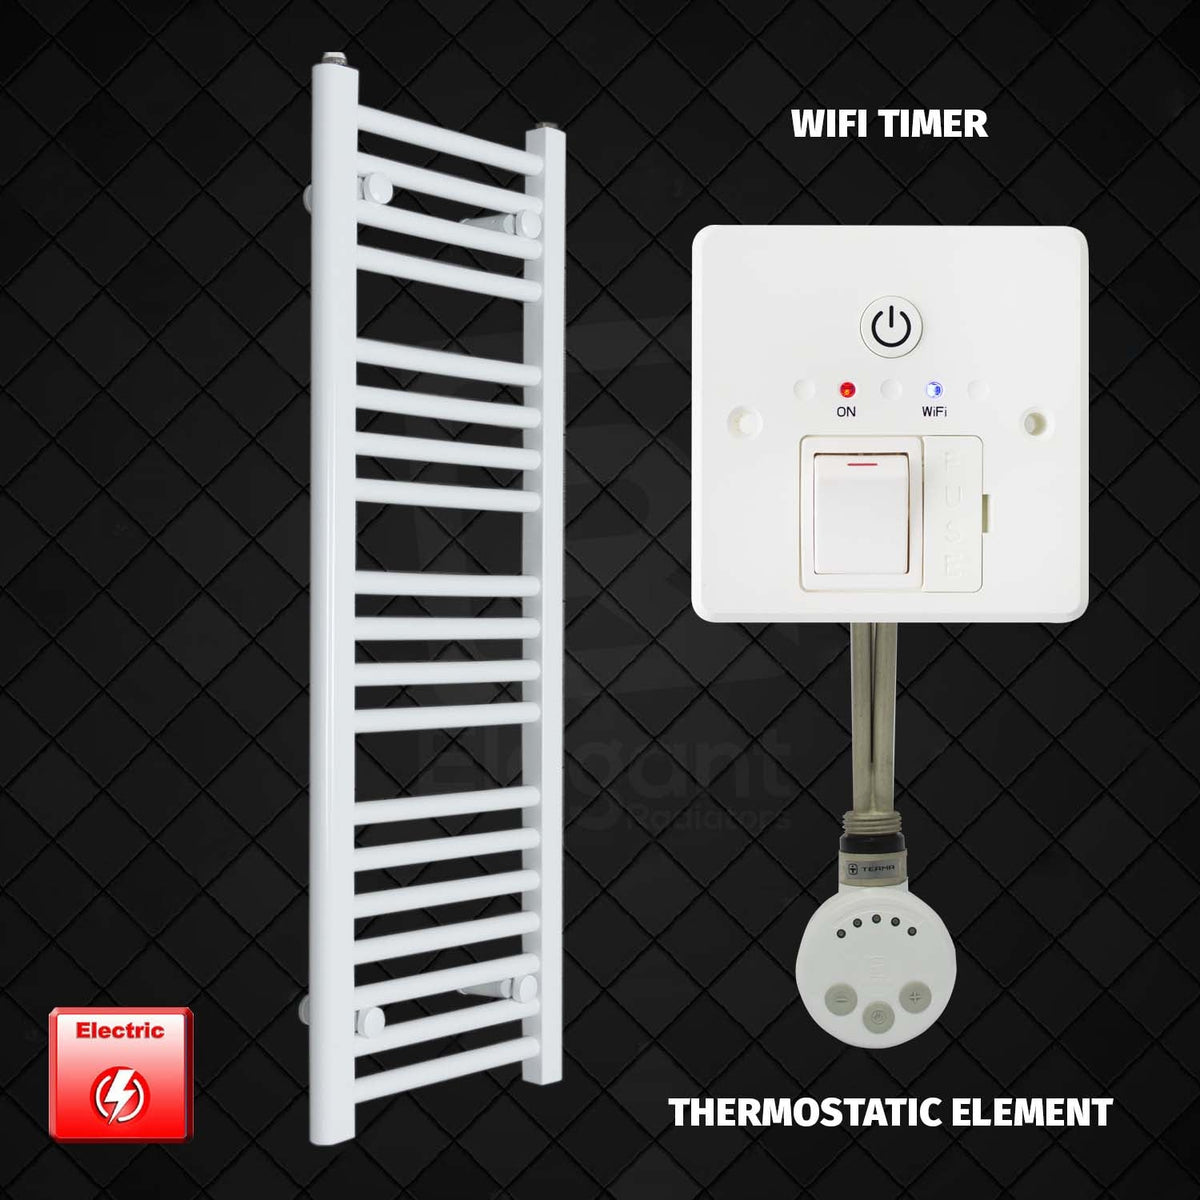 1000 mm High 300 mm Wide Pre-Filled Electric Heated Towel Rail Radiator White Wifi Timer Thermostatic Element